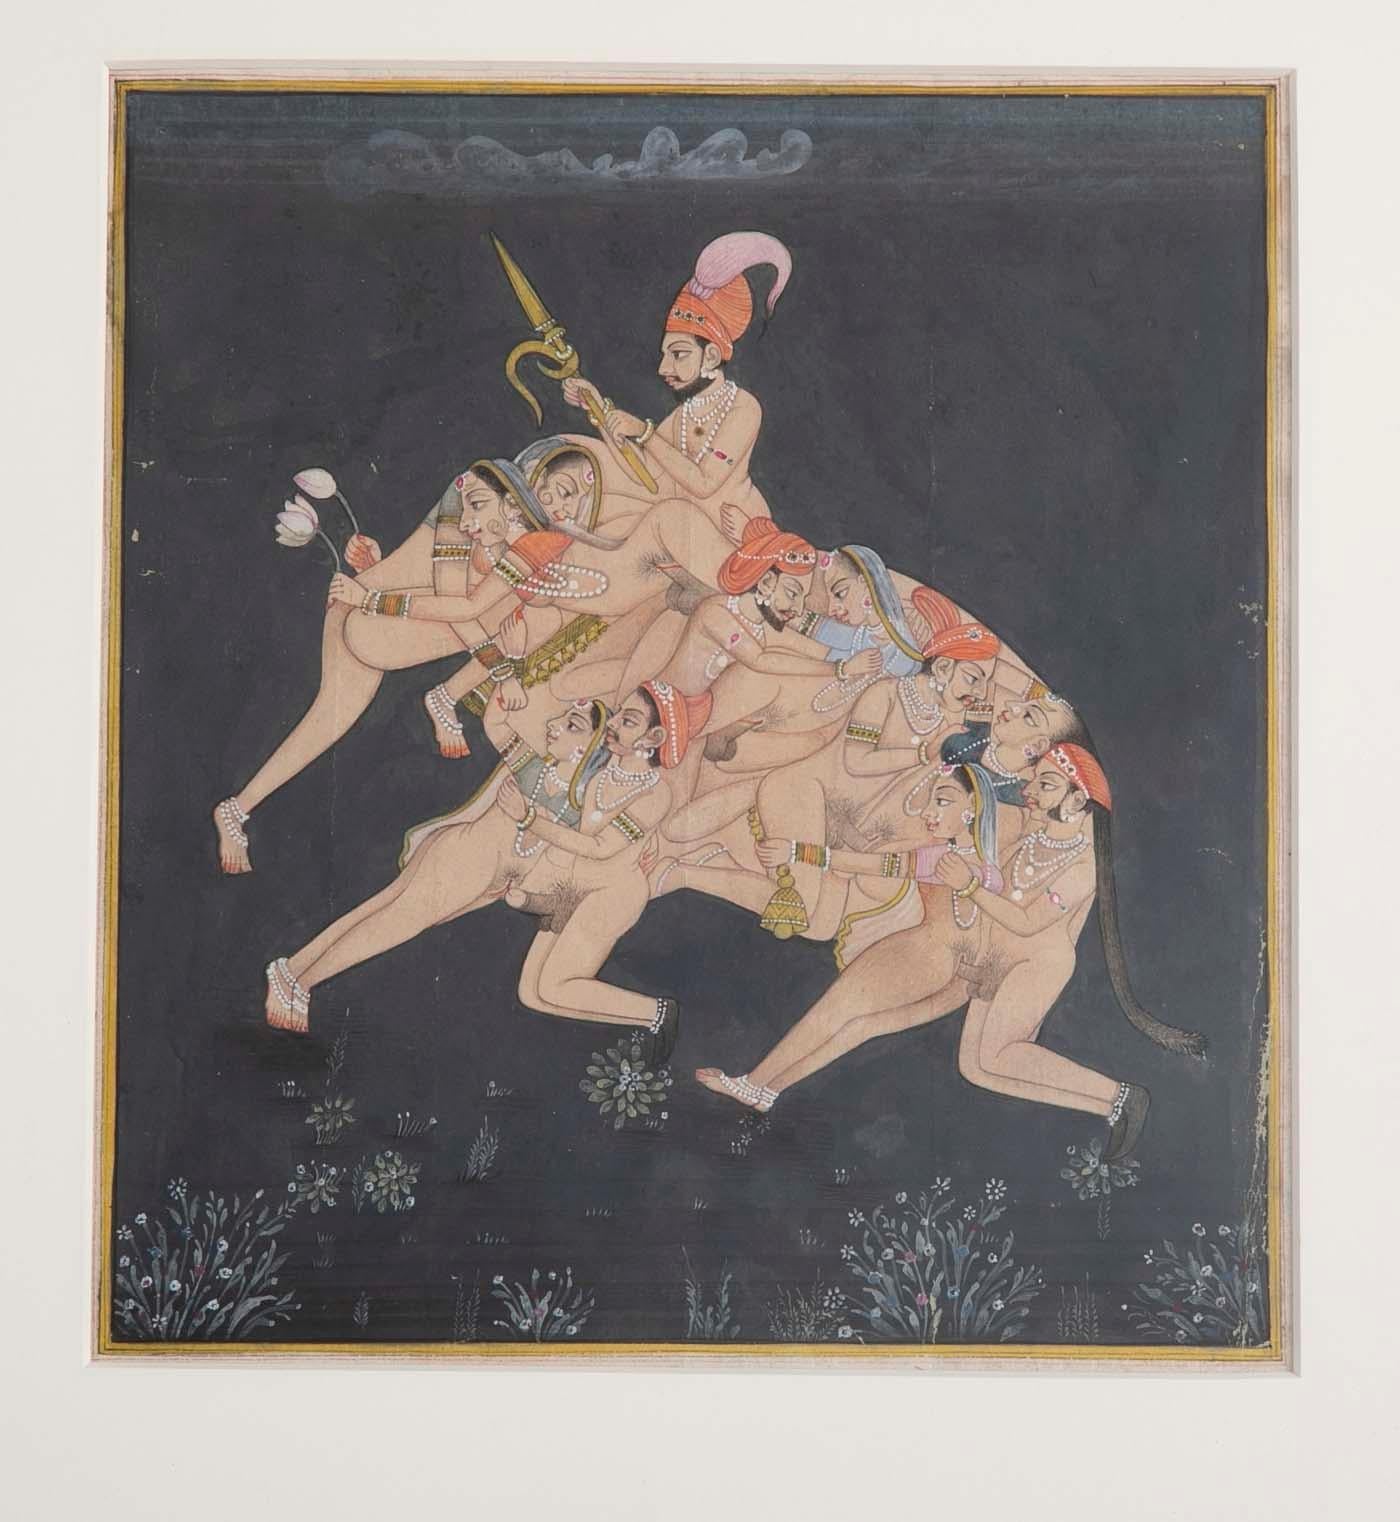 A stunning Indian erotic zoomorphic gouache depicting an elephant formed from copulating couples engaging in various positions. The actions of the couples juxtaposed with the calm demeanor on their faces makes the gouache quite amusing, compelling,